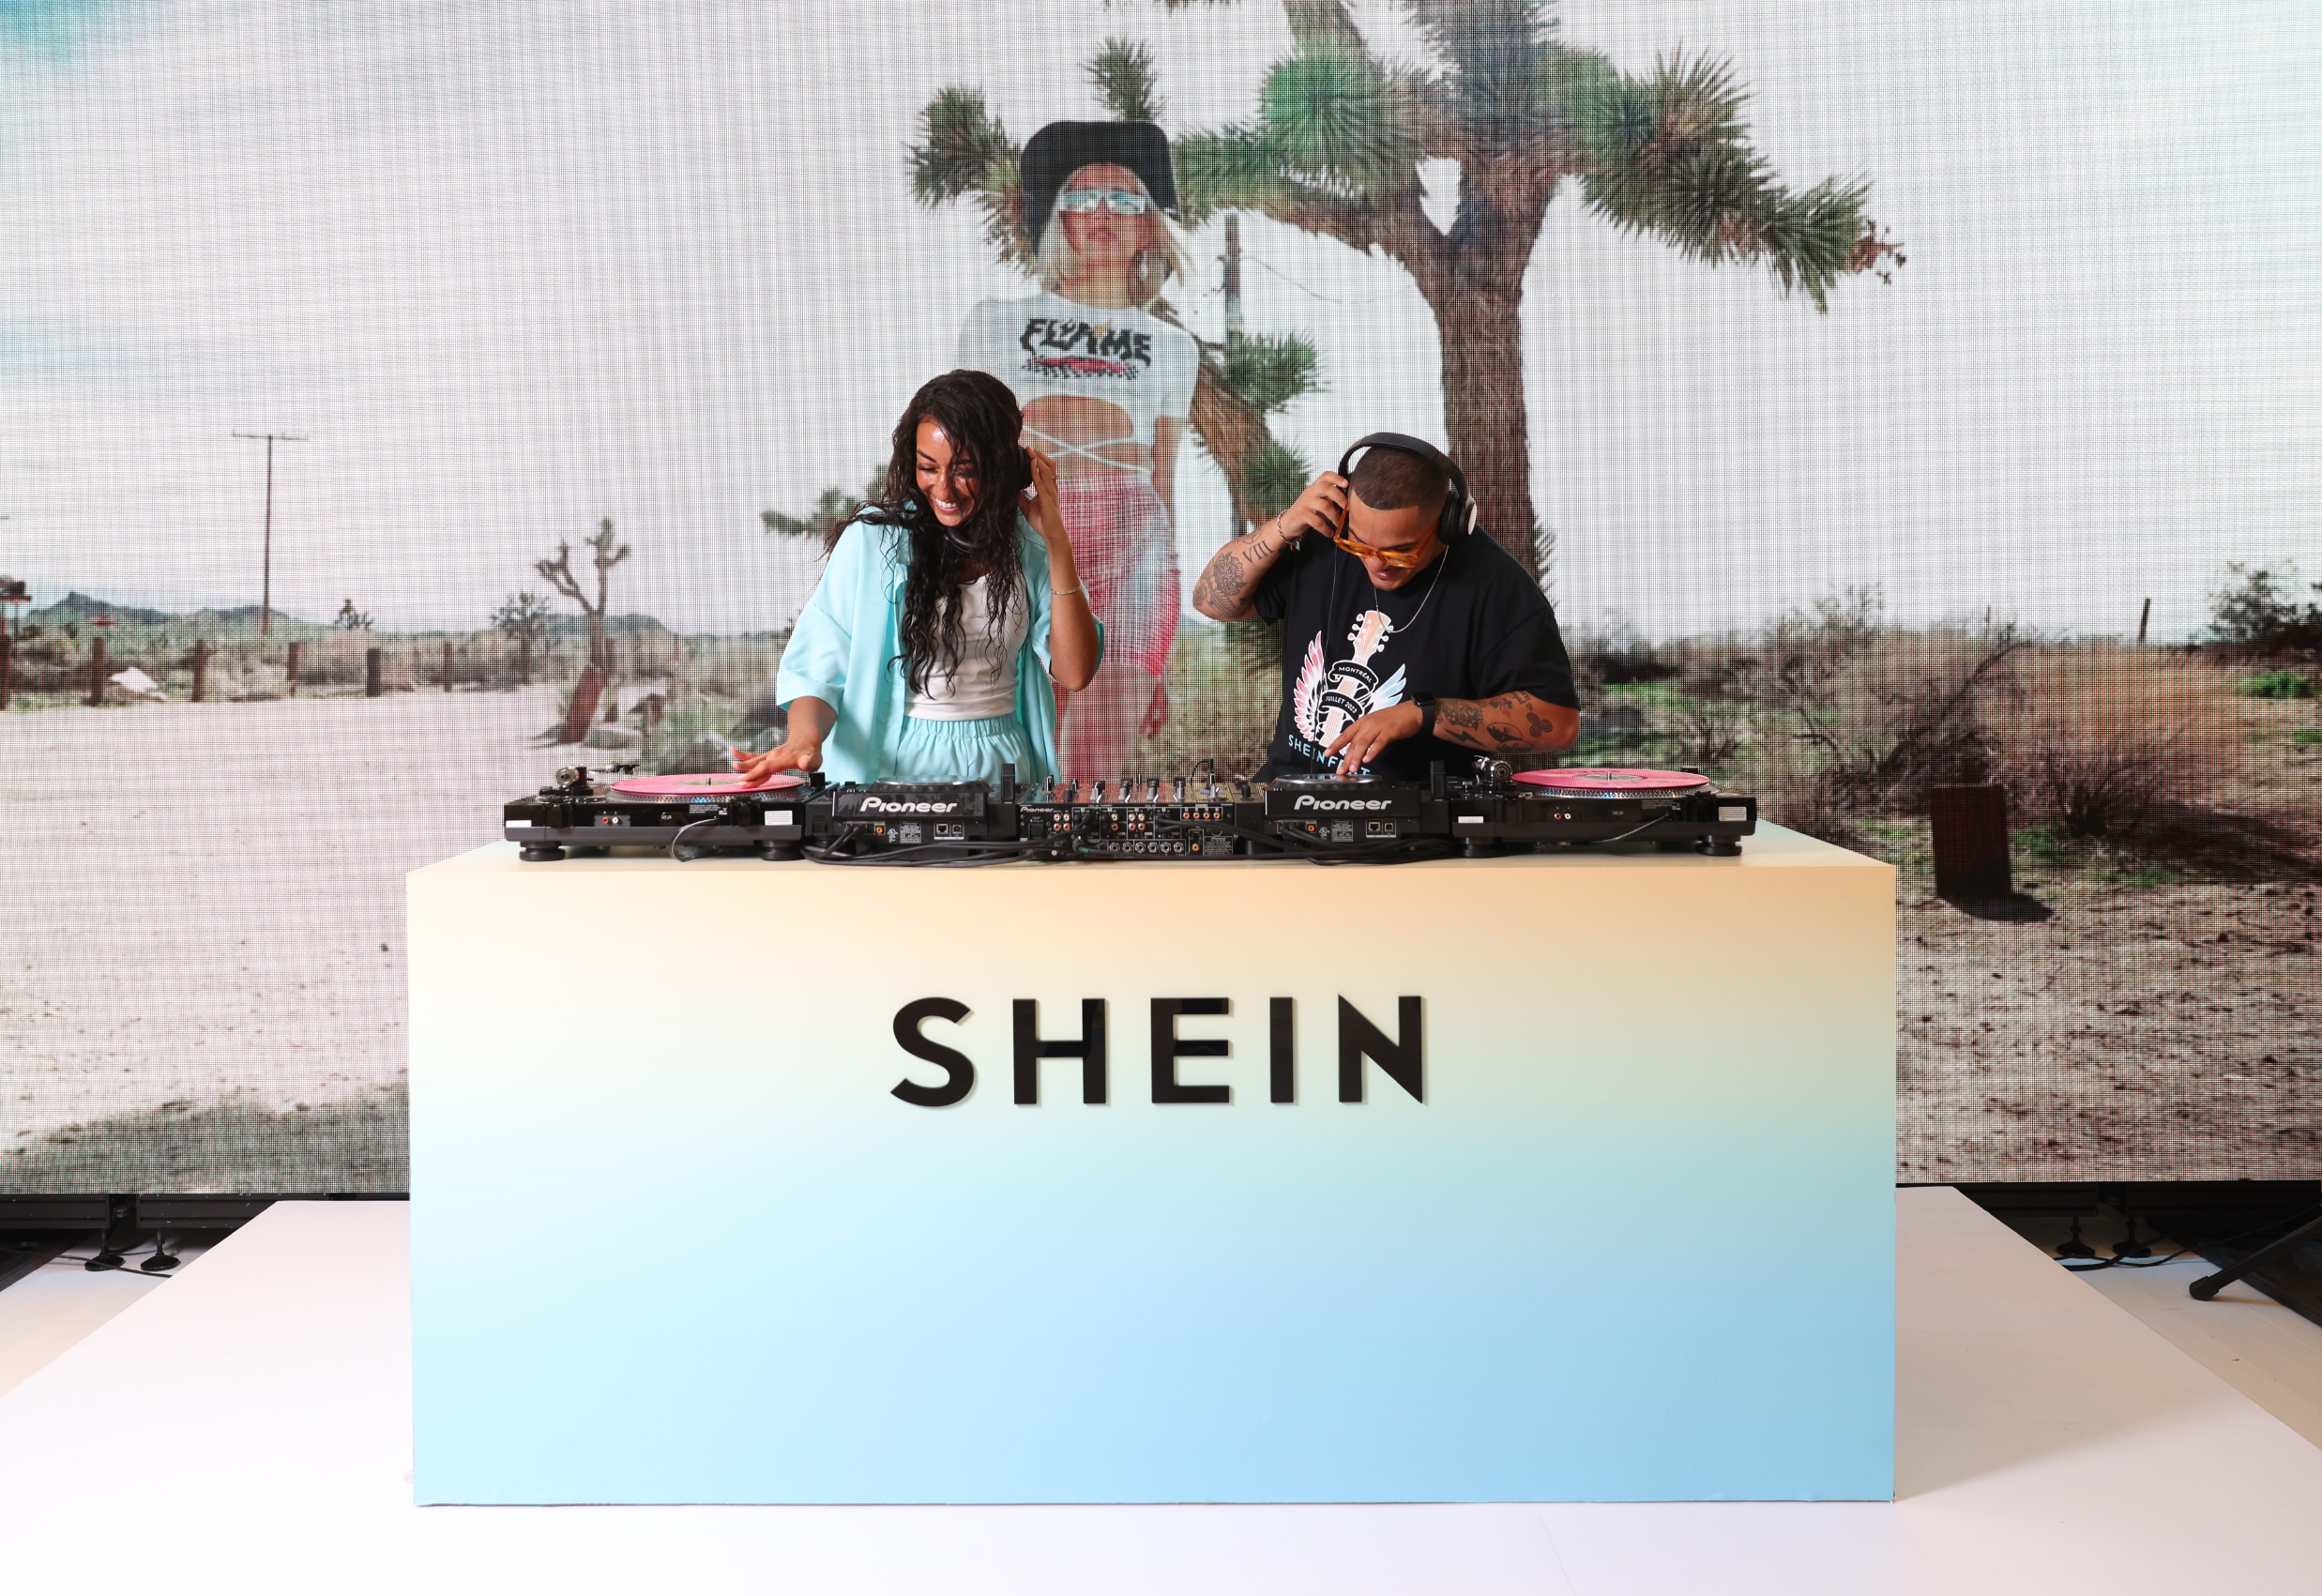 SHEIN Brings the Ultimate Festival Style Experience to VELD Music Festival